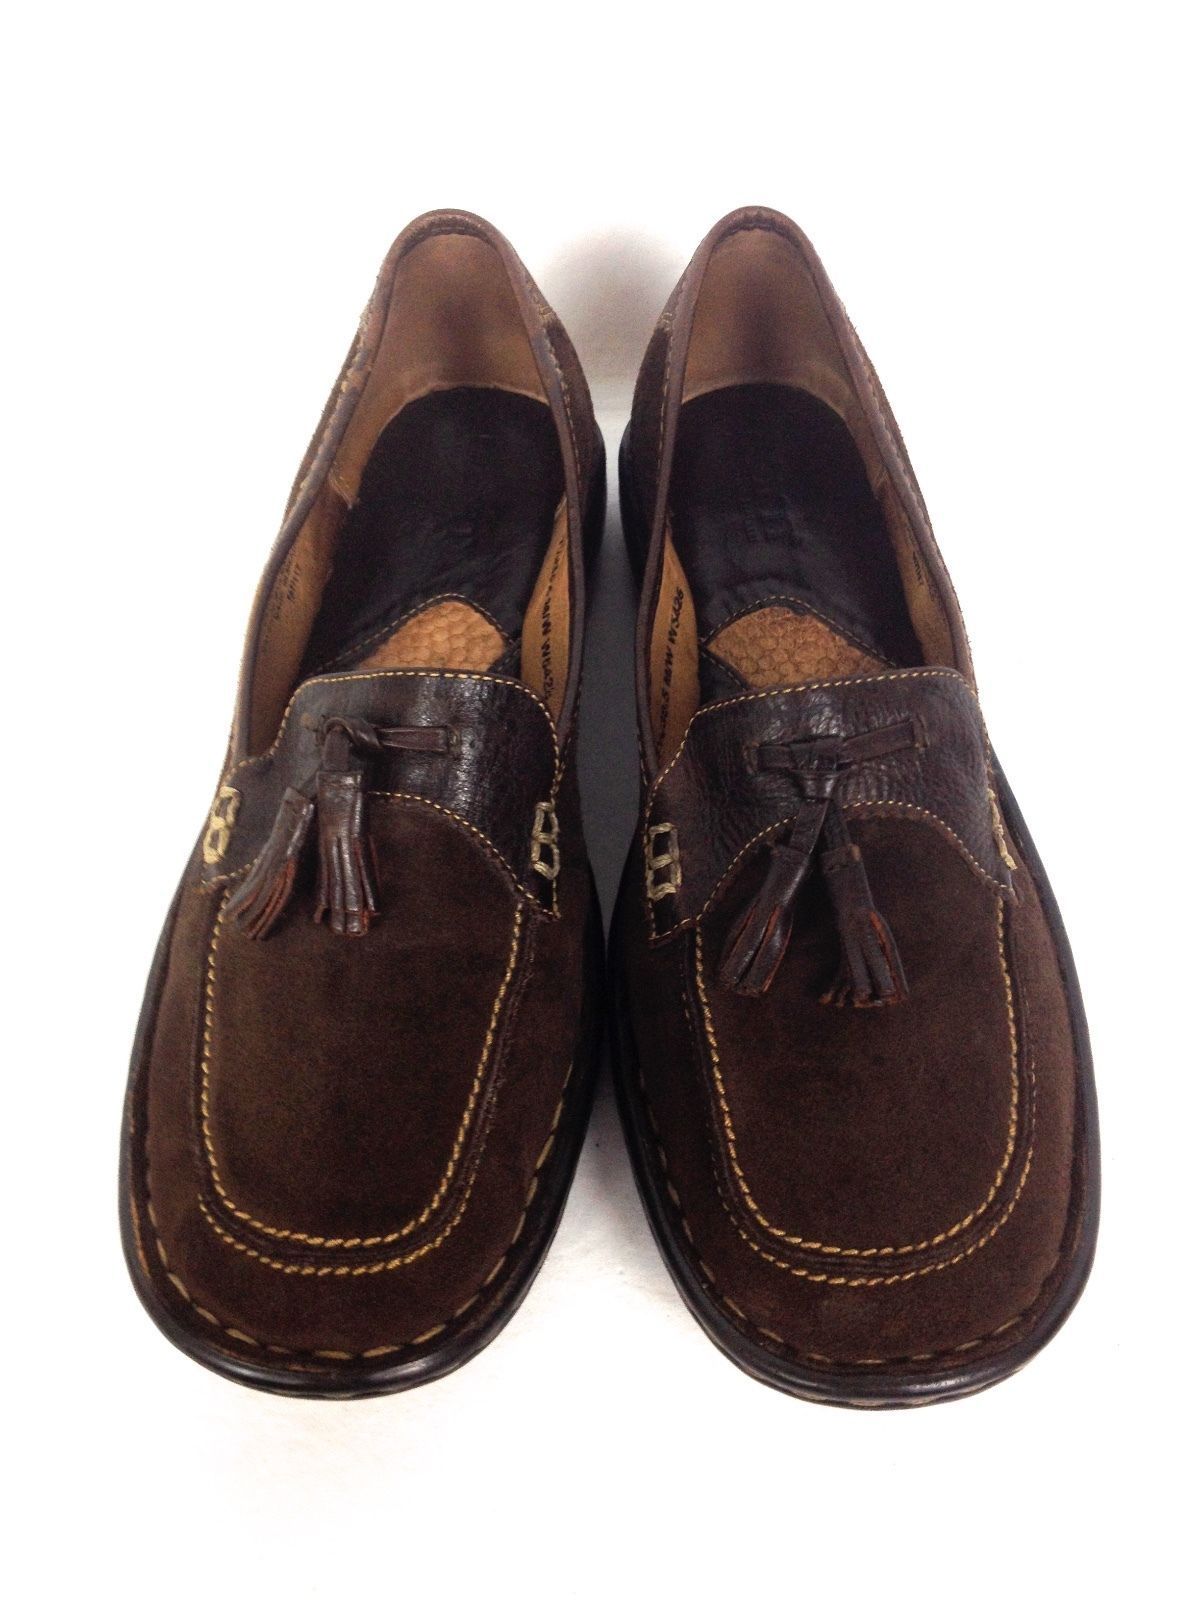 Born Shoes 7.5 Womens Brown Leather Loafers For Sale ...